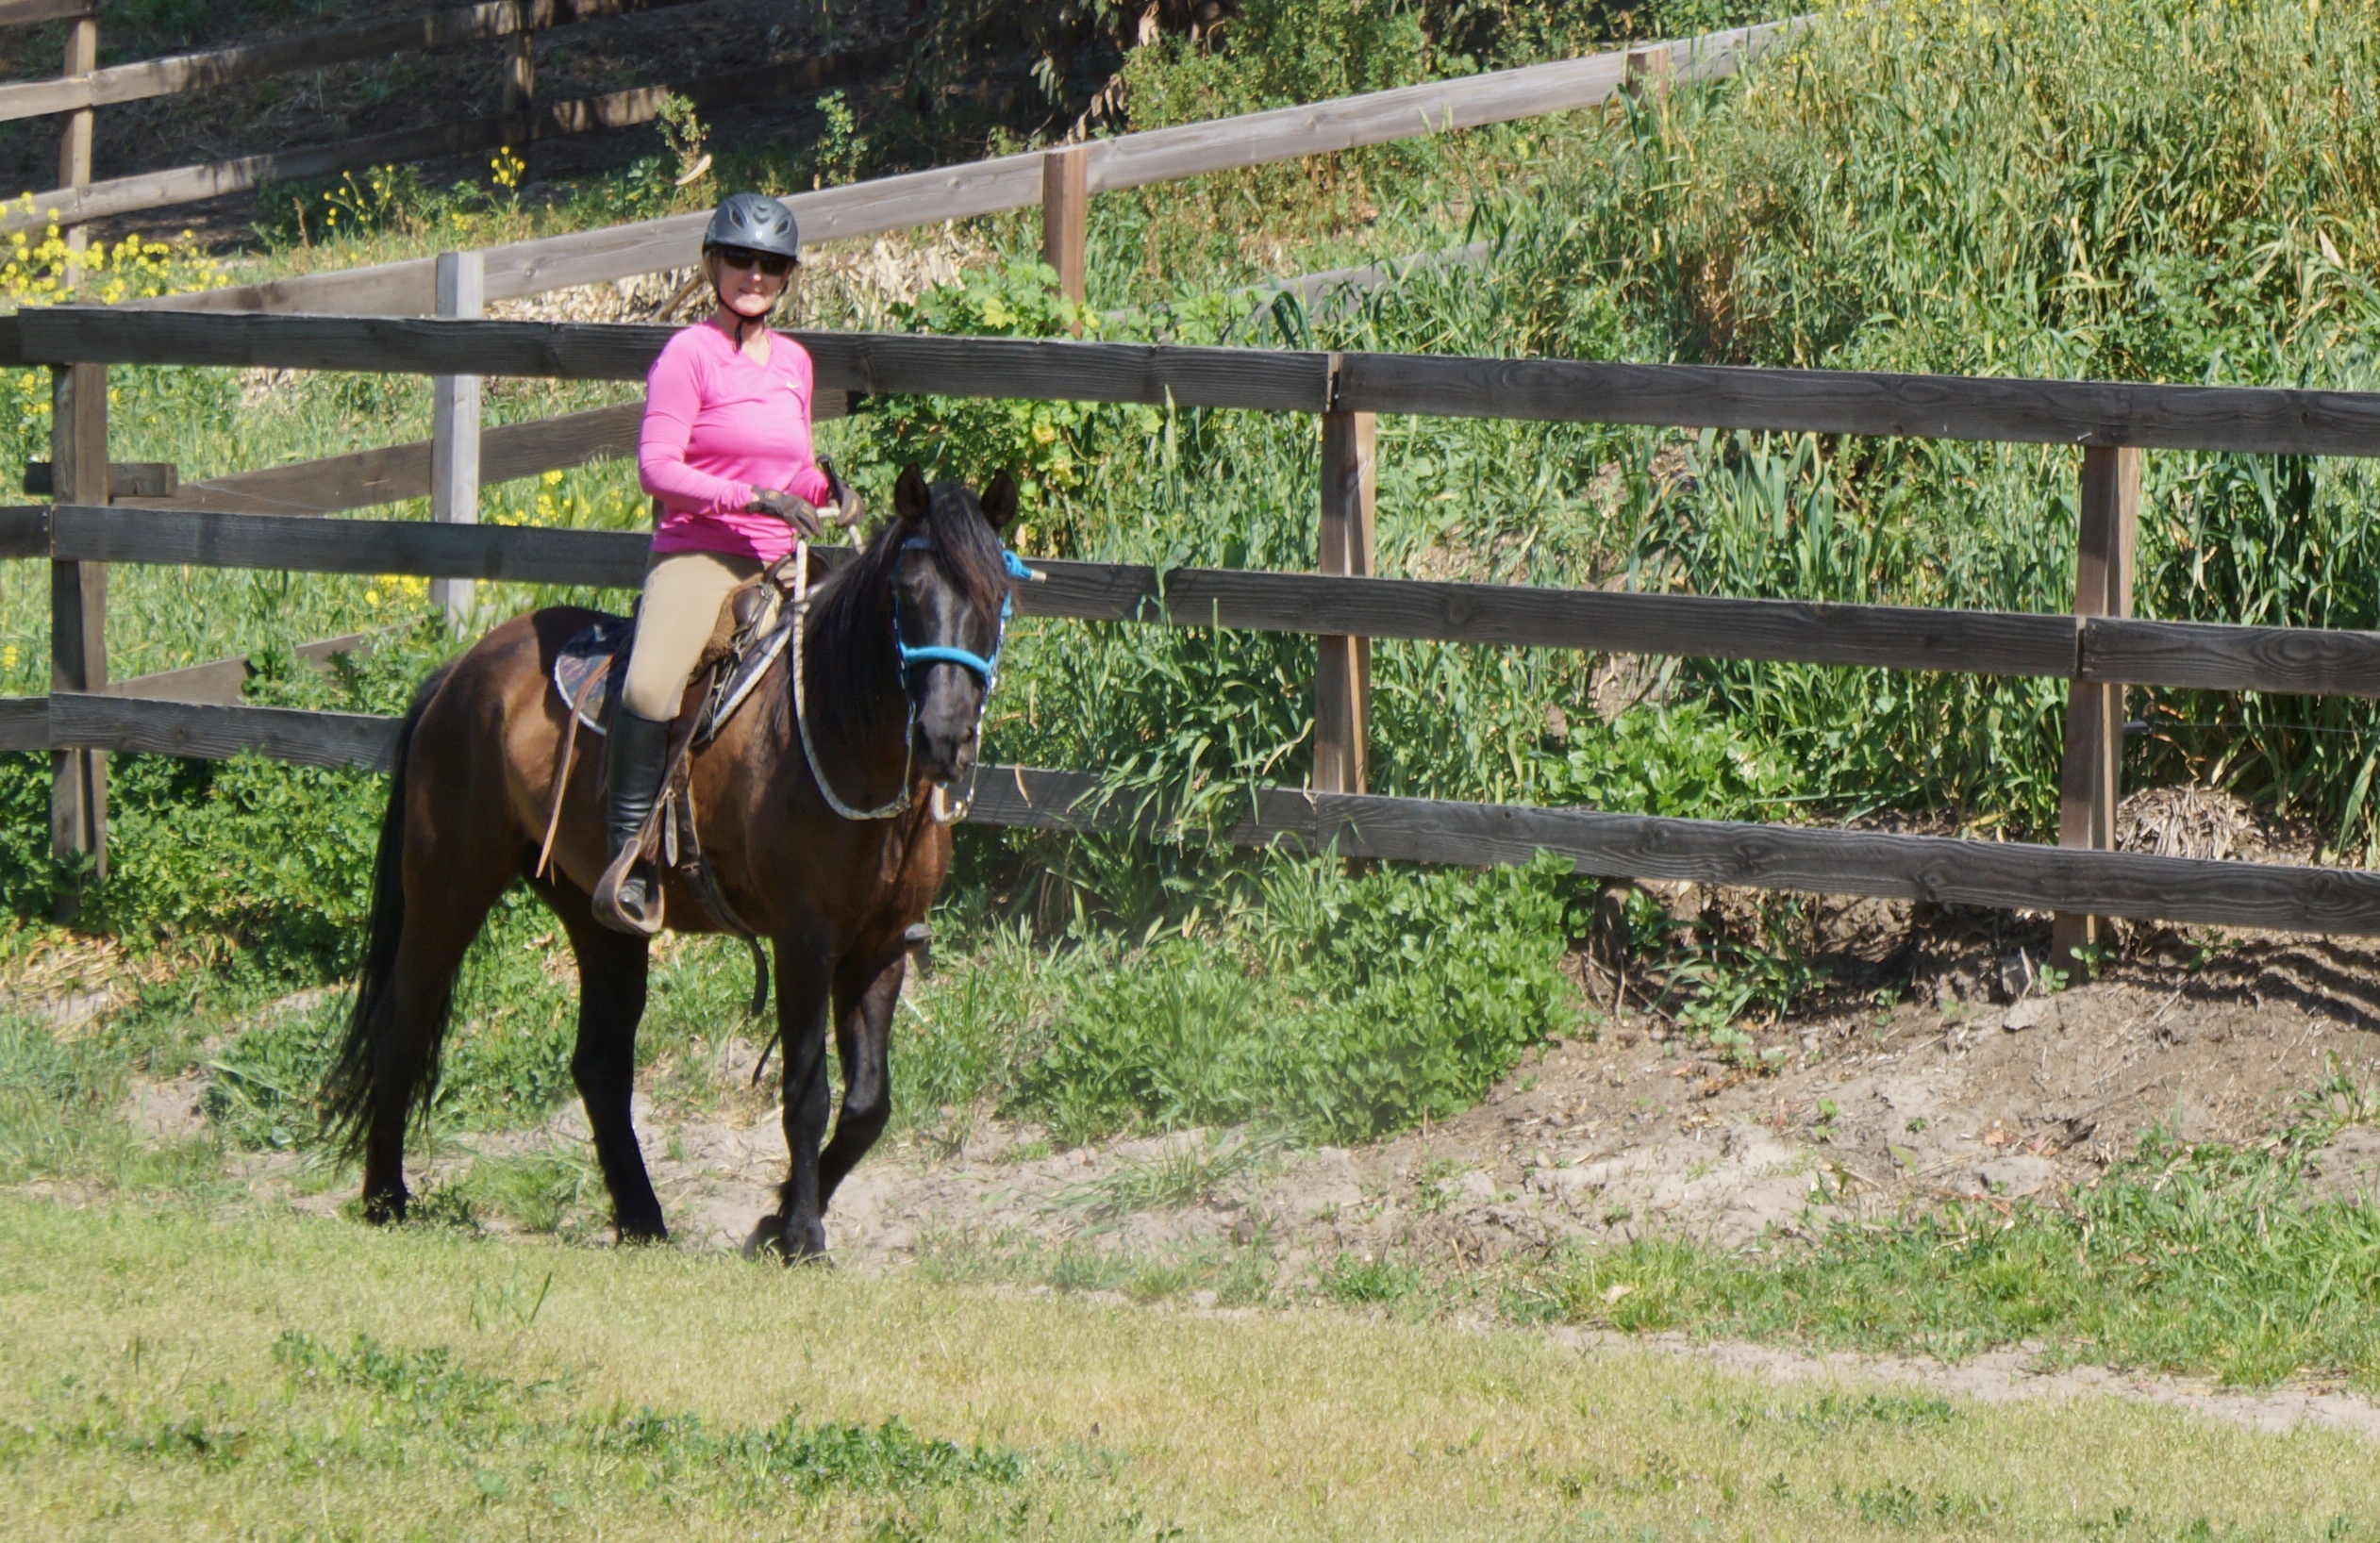 Connecting with the Outside of a Horse | SLO Horse News